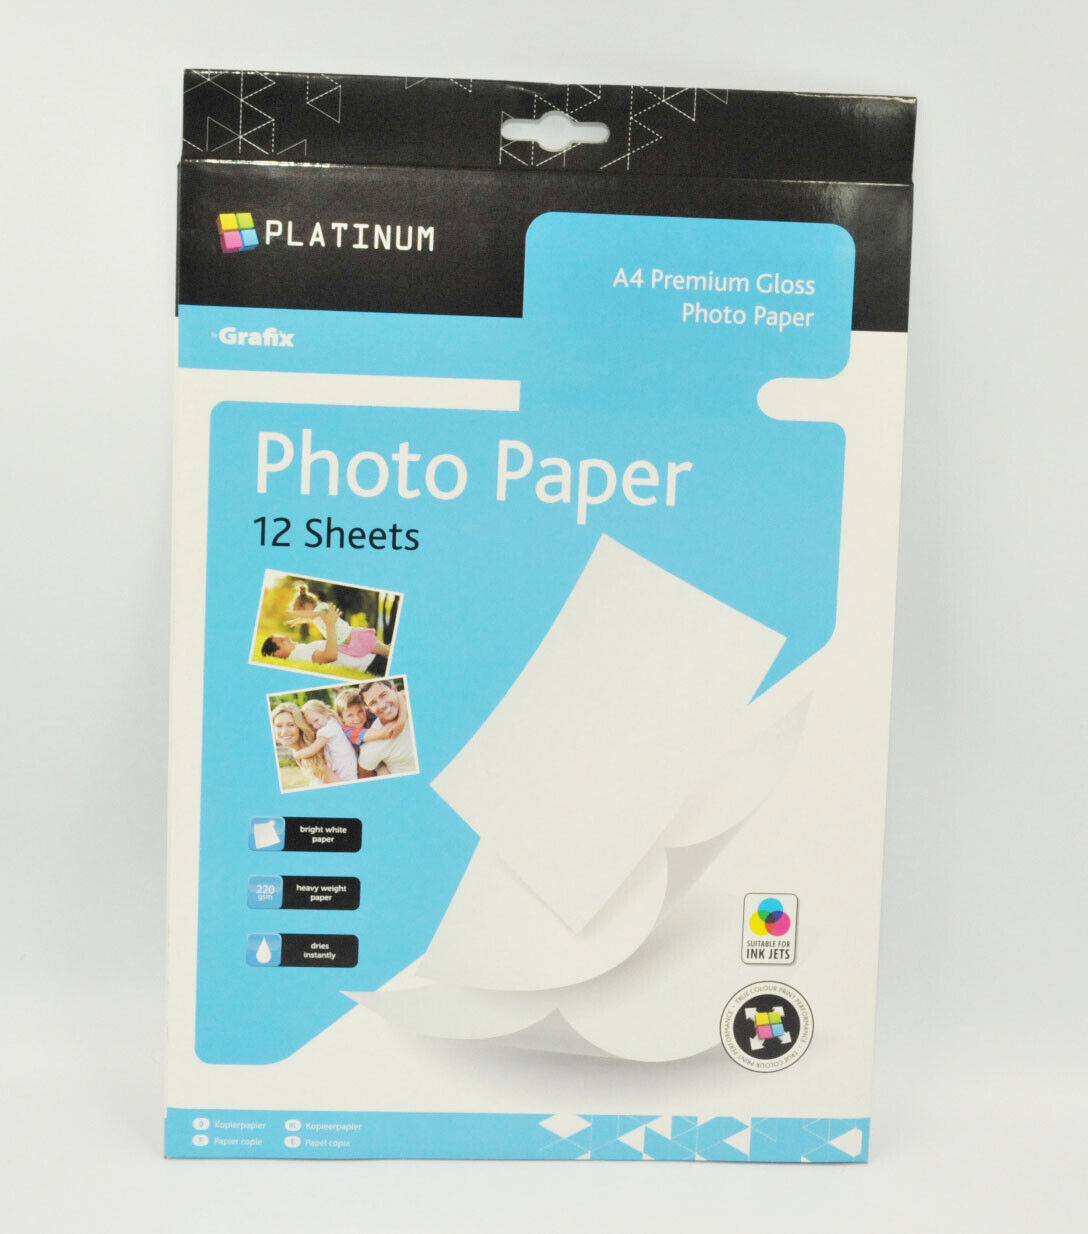 A4 Premium Photo Paper Platinum 220gsm Glossy 12 Sheets Size 297mm x 210mm